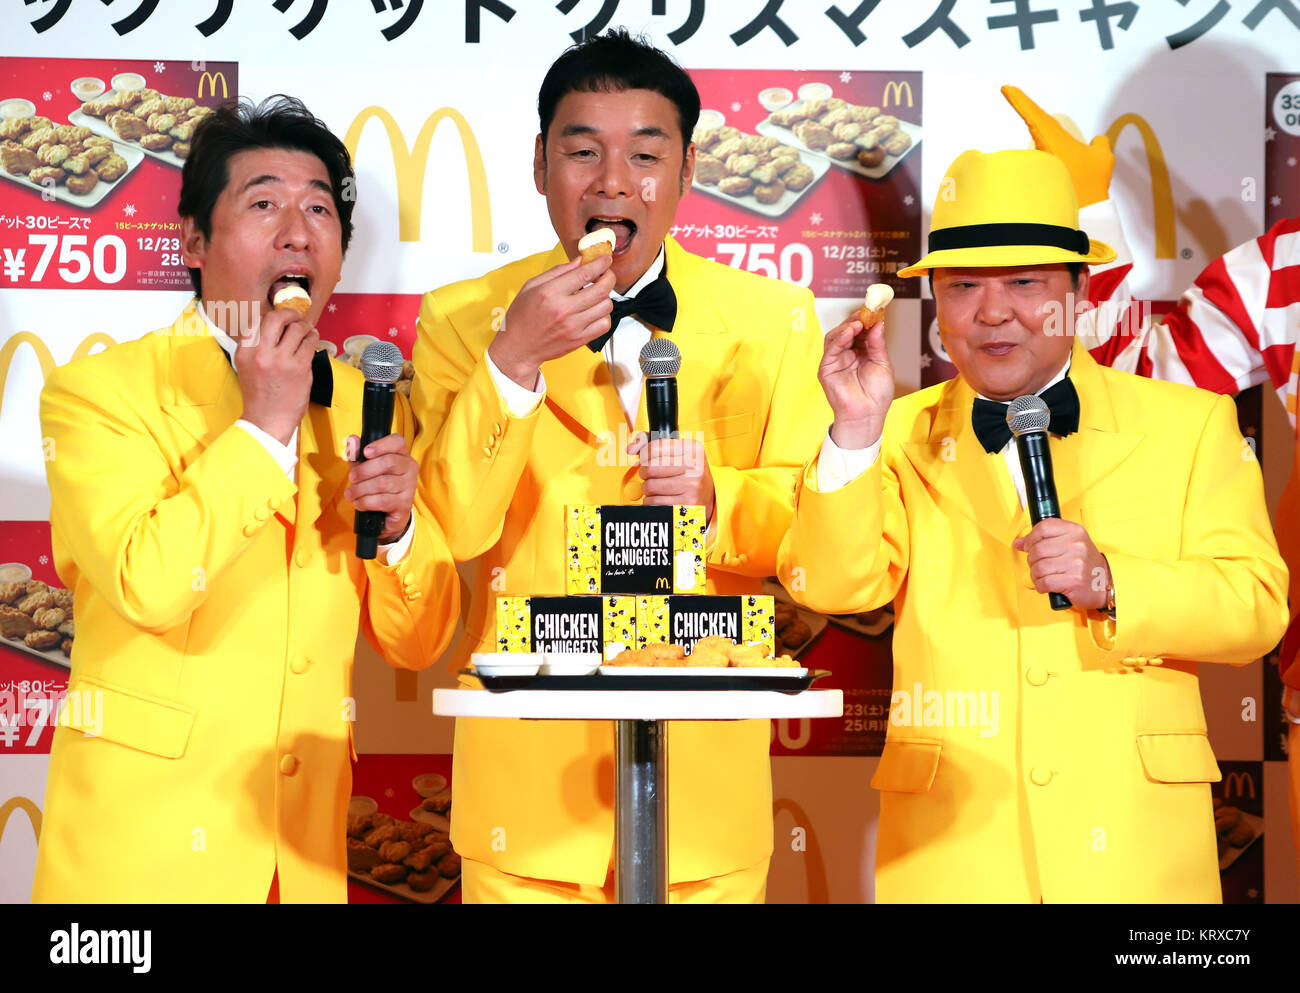 Tokyo, Japan. 21st Dec, 2017. (L-R) Japan's comedy trio Dacho-Club members Jimon Terakado, Katsuhiro Higo and Ryuhei Ueshima attend a promotional event of McDonald's Japan's Chicken McNuggets in Tokyo on Thursday, December 21, 2017. McDonald's Japan will have a campaign for their Chicken McNuggets with a discount price and special flabored dipping saurces. Credit: Yoshio Tsunoda/AFLO/Alamy Live News Stock Photo